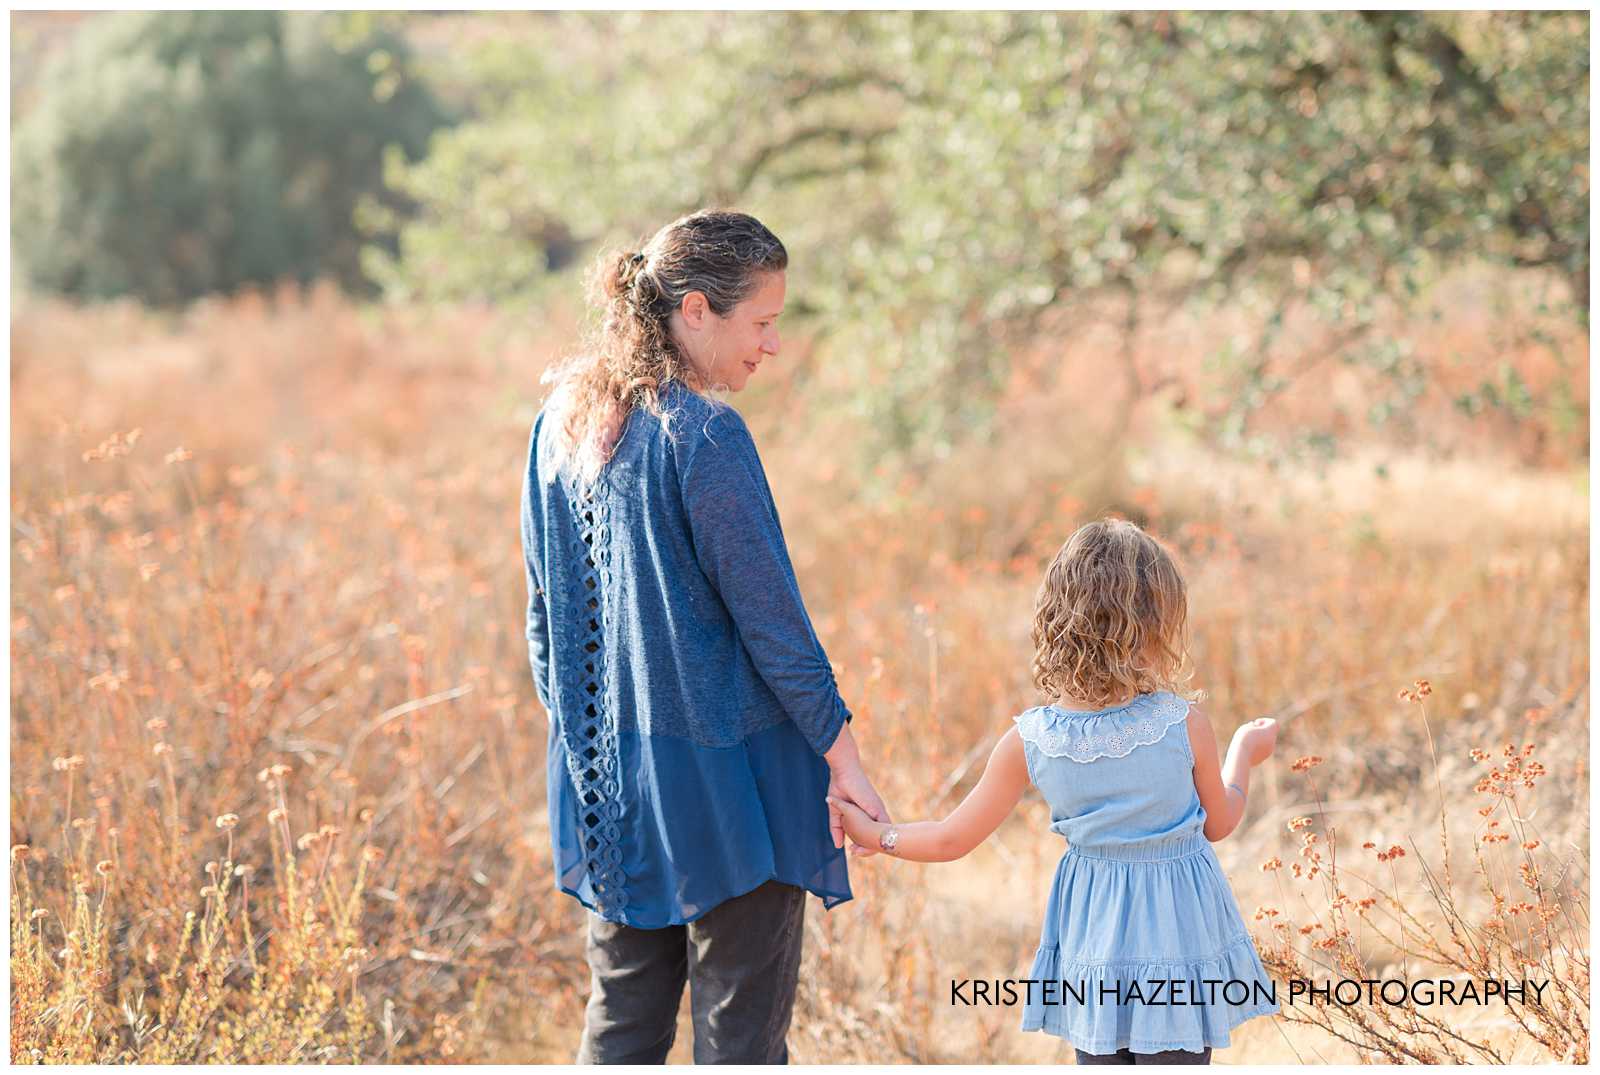 Mom and daughter walking through a field